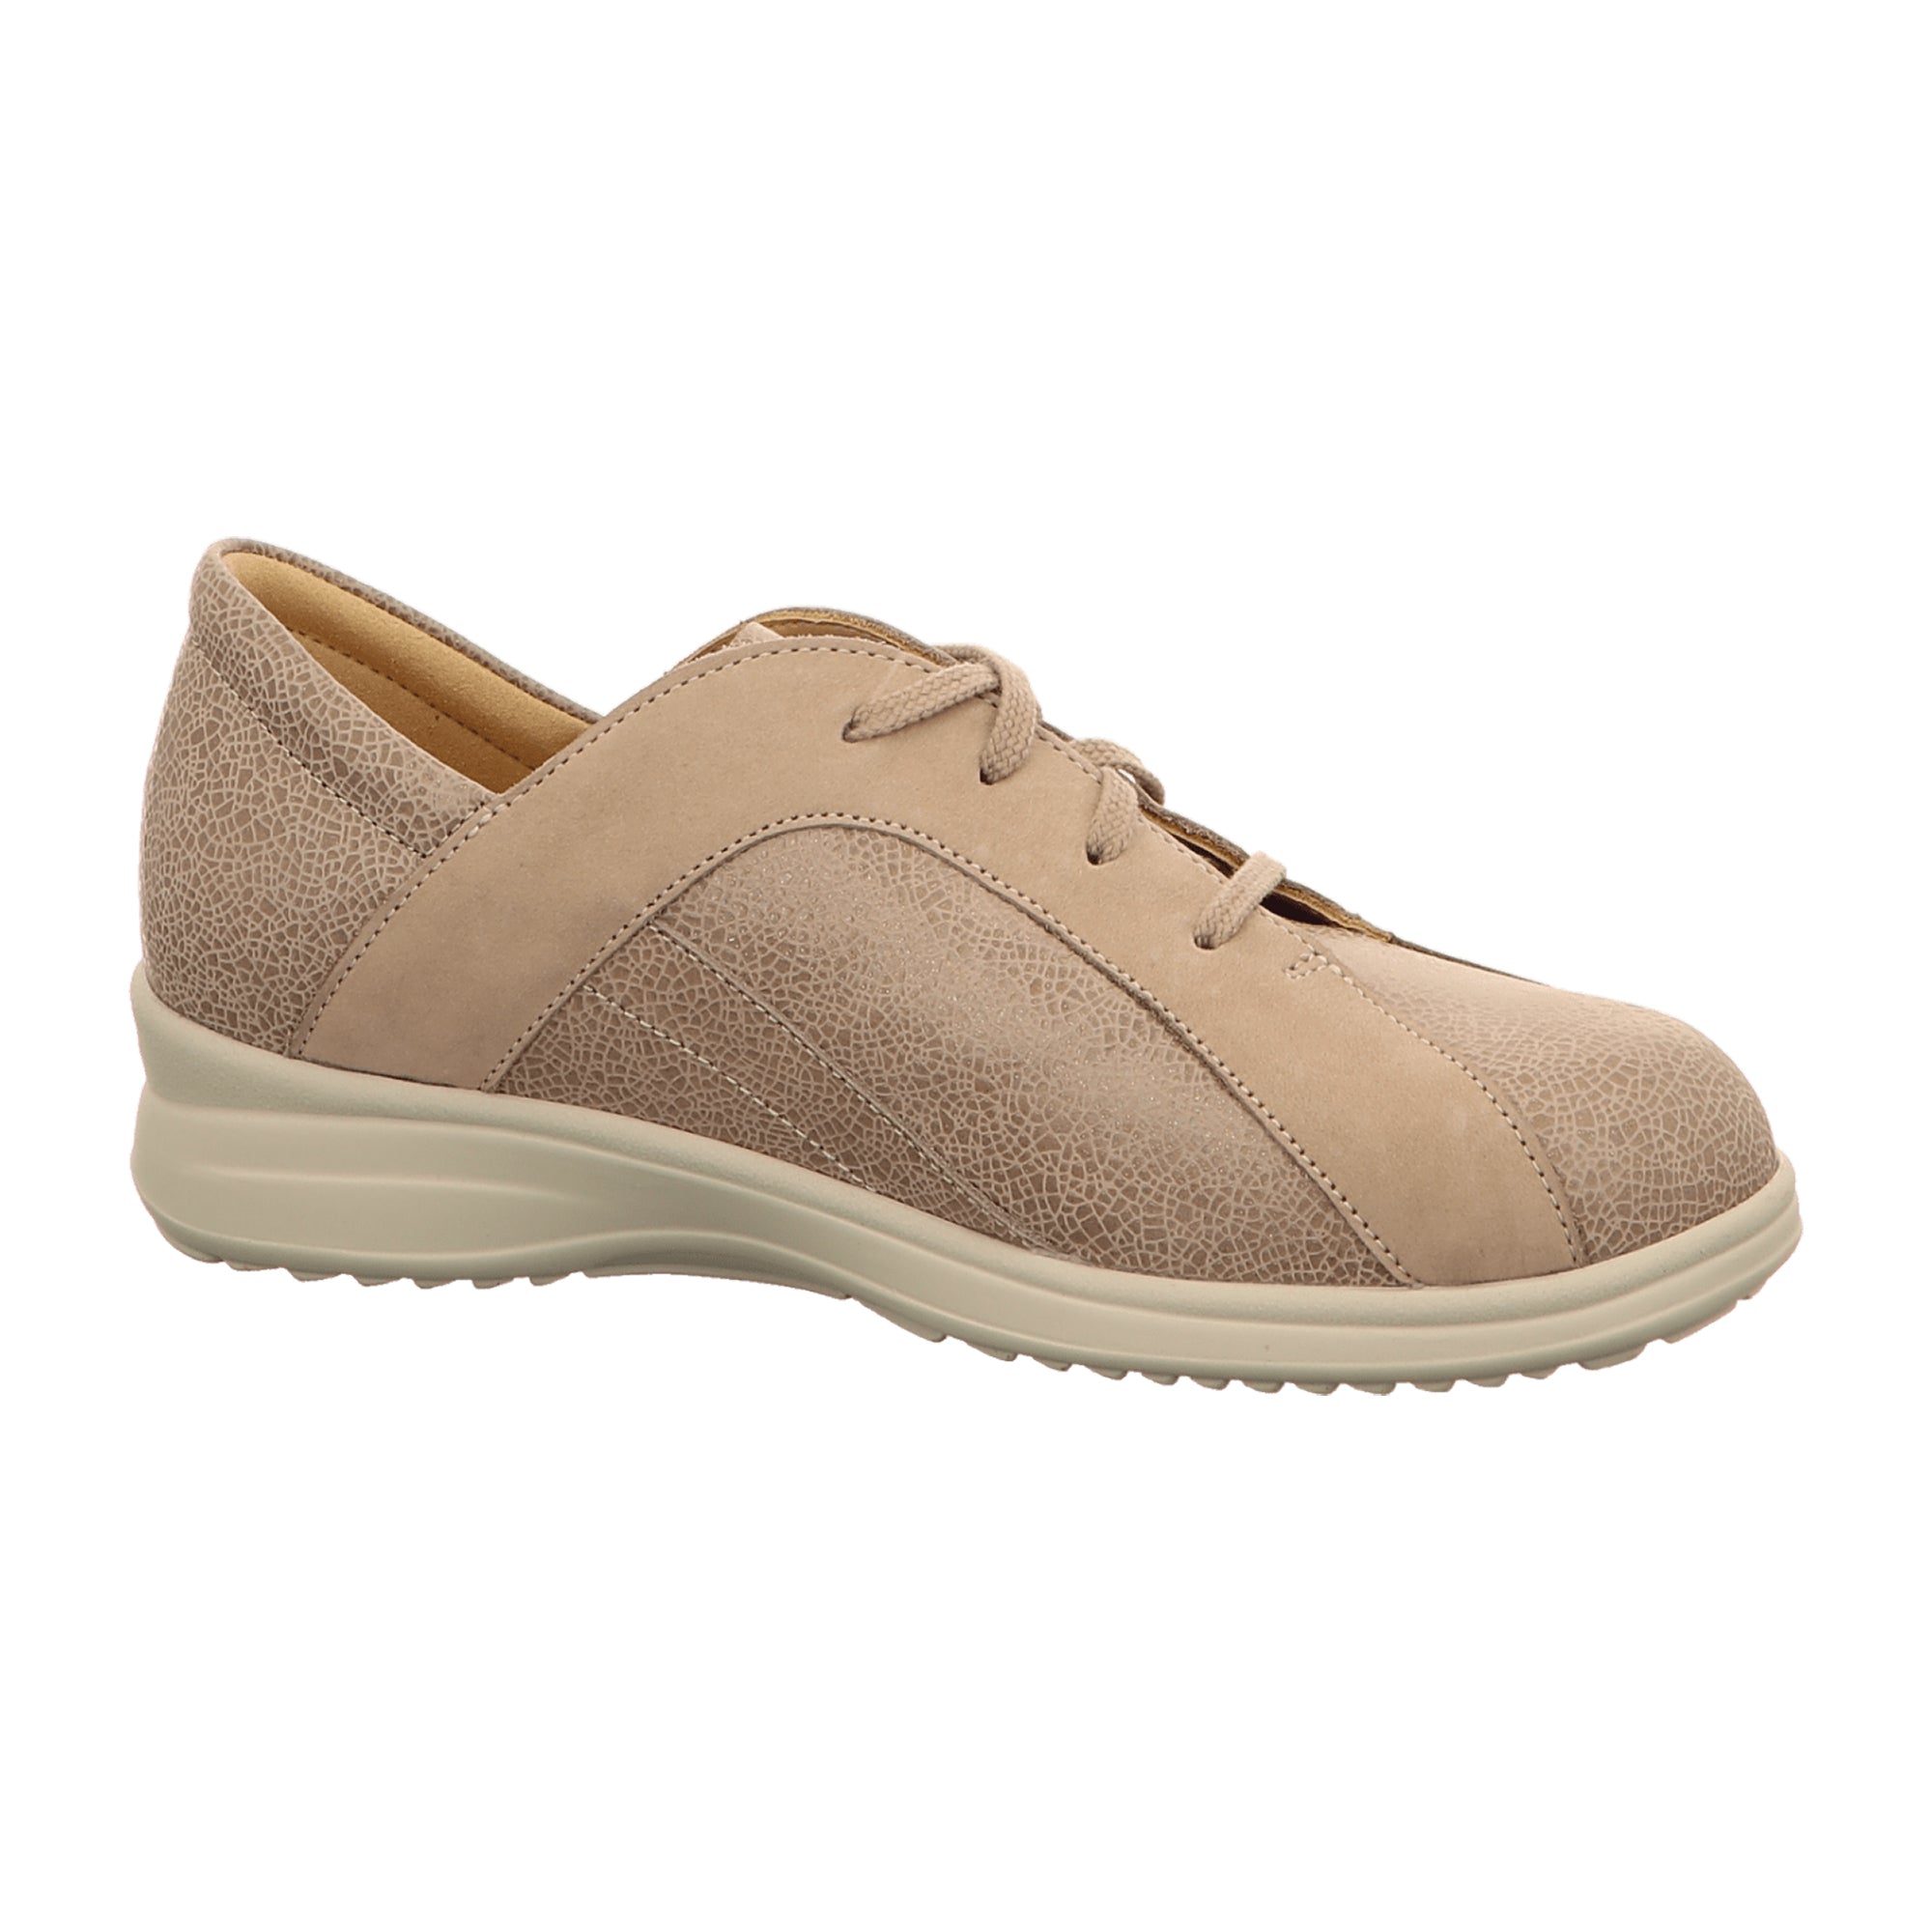 Finn Comfort Mineola Women's Comfort Shoes - Stylish Beige Walking Shoes for Young Adults